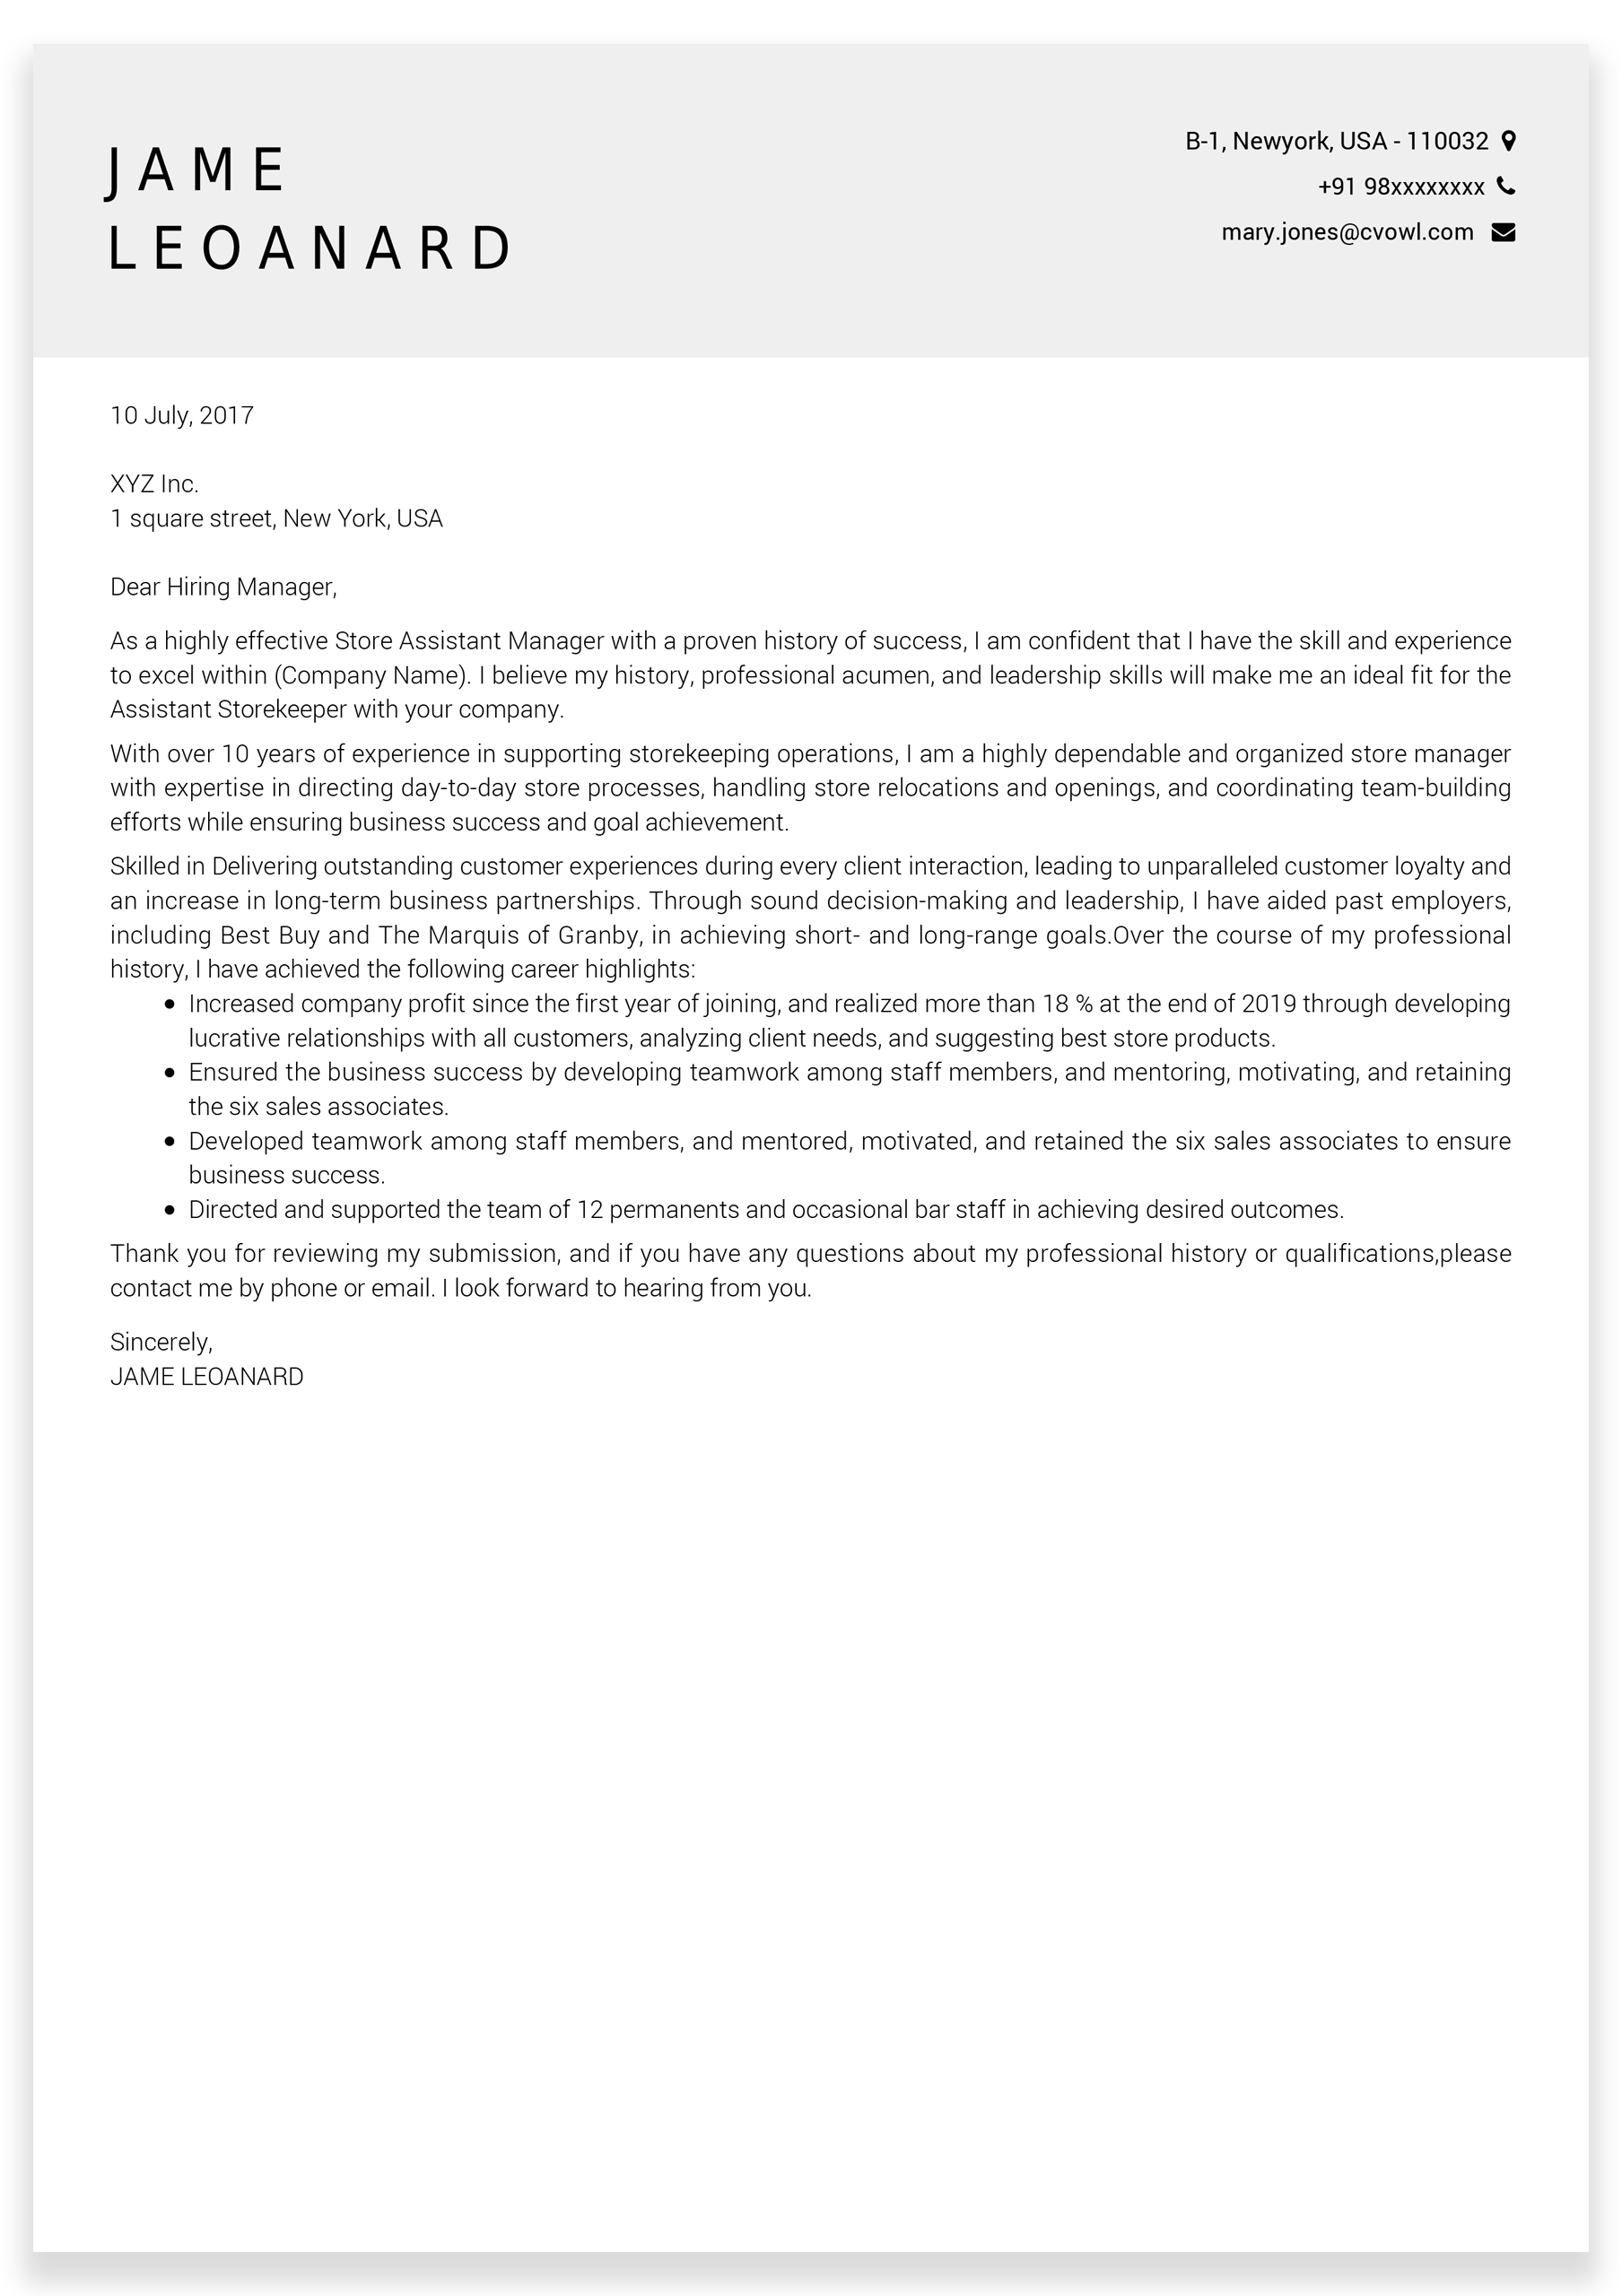 Guest-Faculty-Cover-Letter-sample4